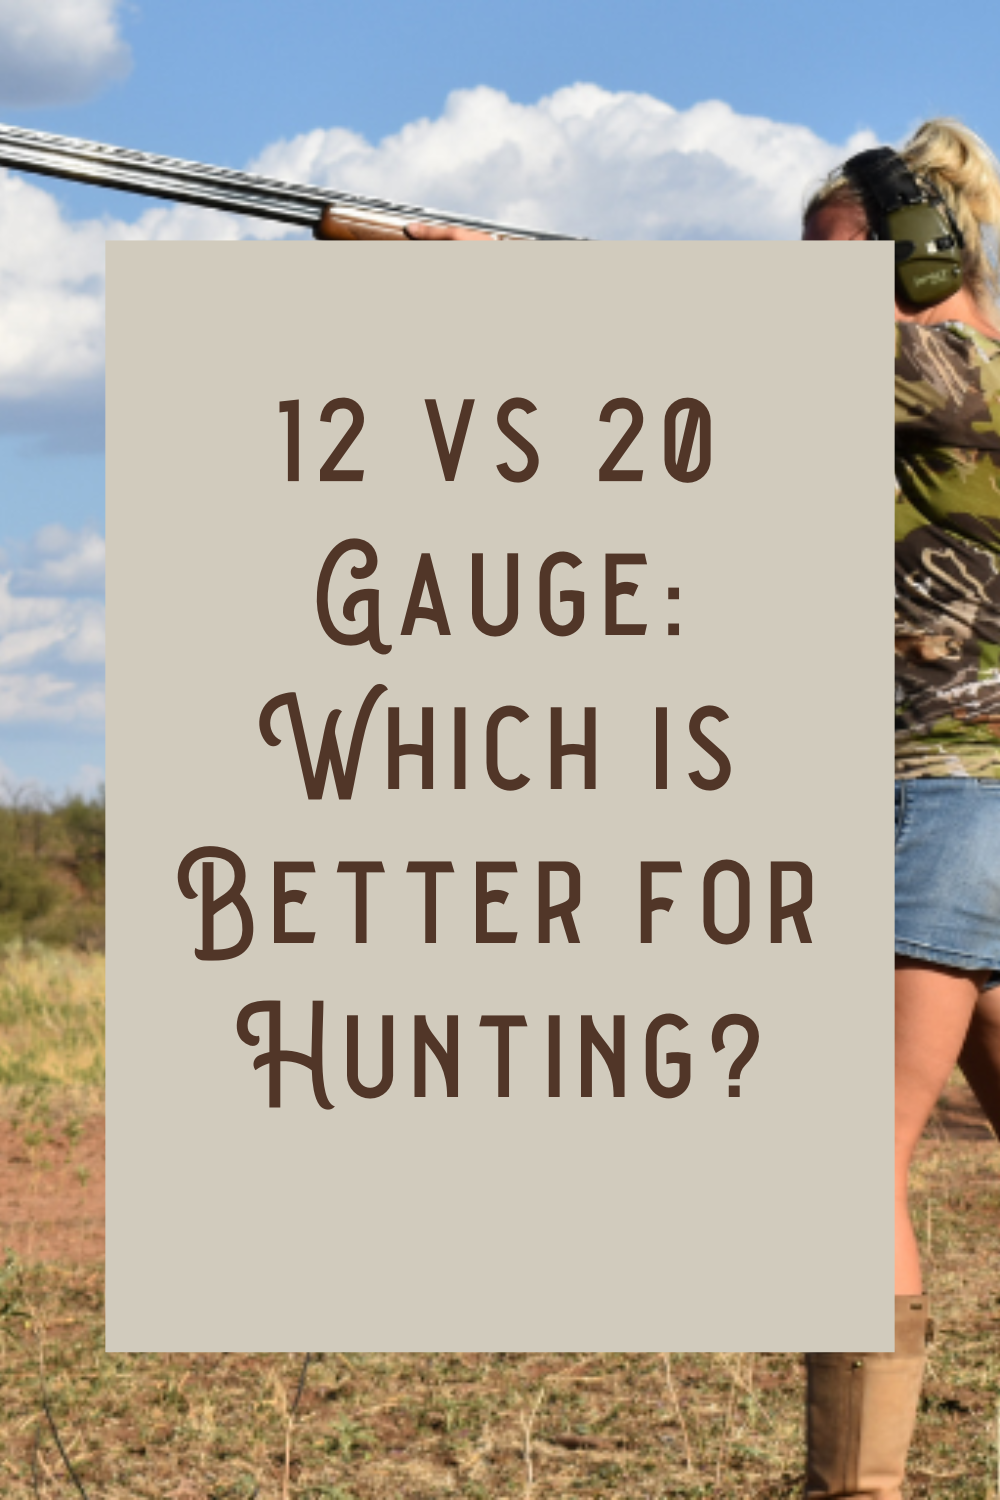 12 vs 20 Gauge: Which is Better for Hunting?